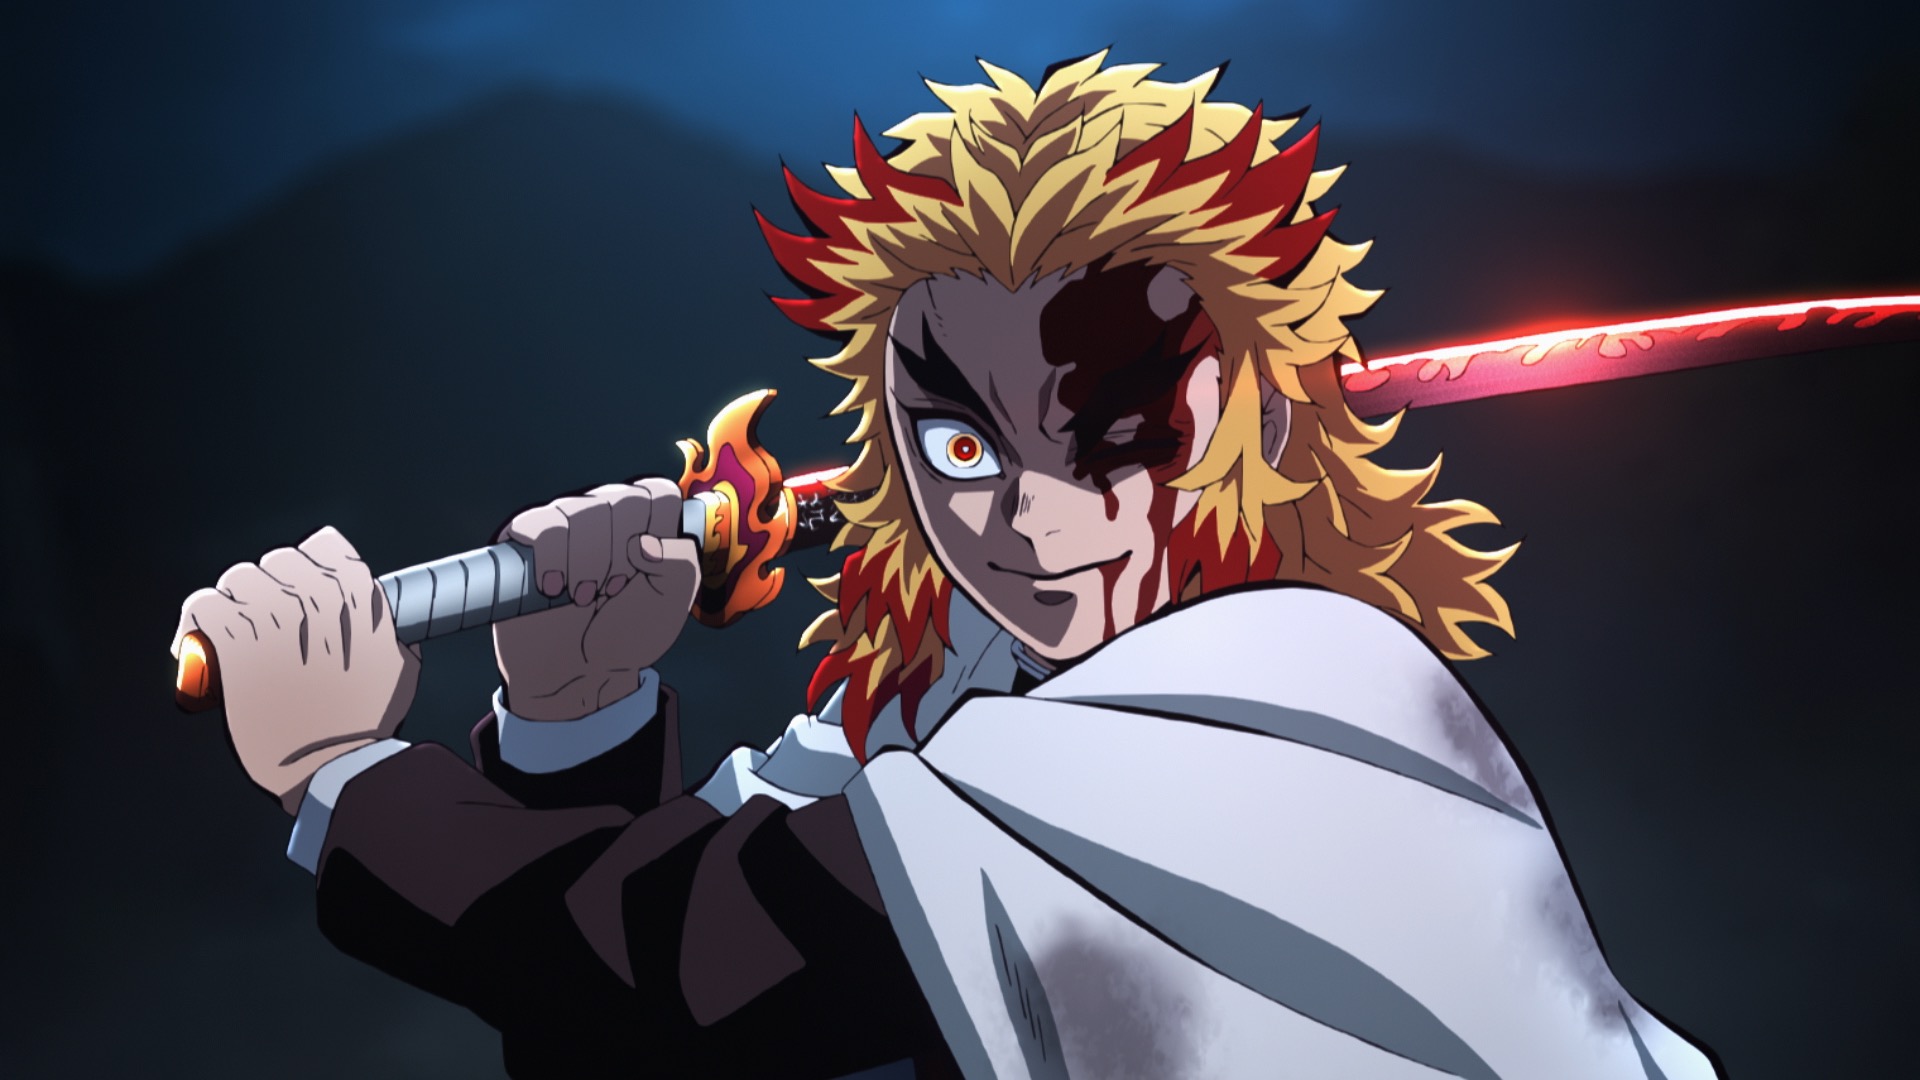 Demon Slayer: Kimetsu no Yaiba (English) on X: Demon Slayer: Kimetsu no  Yaiba Hashira Training Arc TV series will be premiering in Spring 2024 with  an Hour-Long Episode! #DemonSlayer  / X